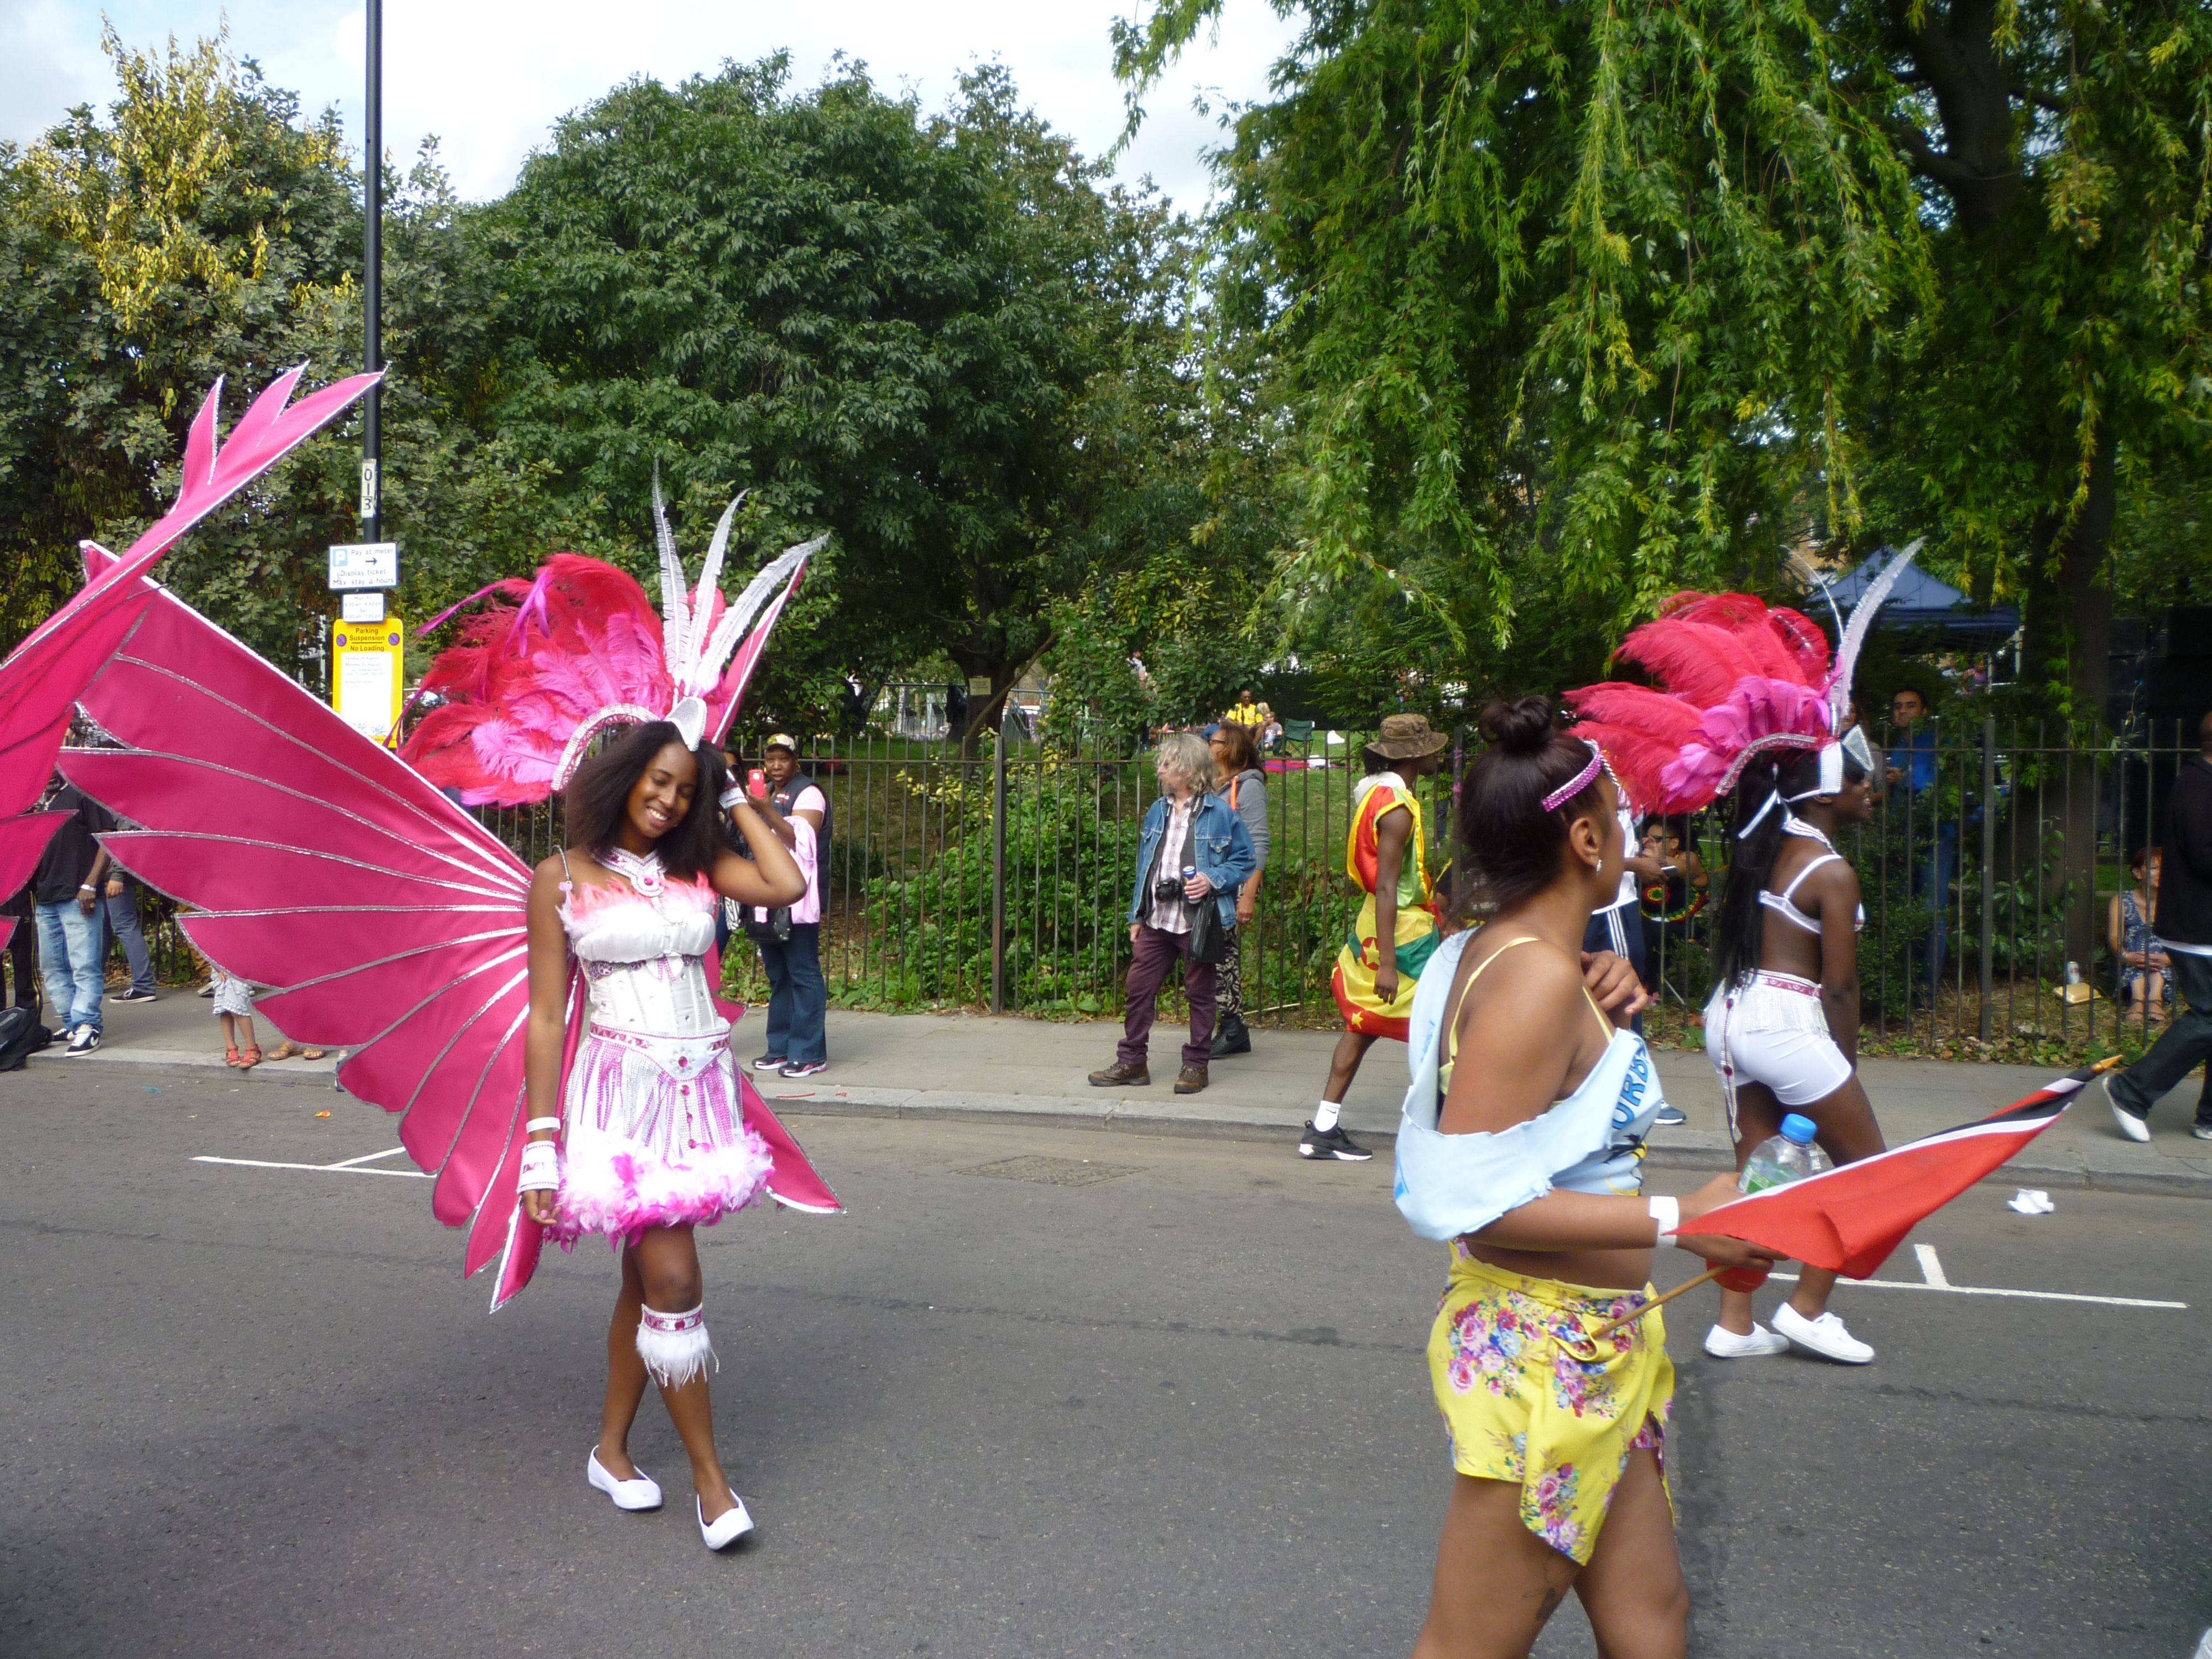 Colour and Rythm at the Notting Hill Carnival 2014